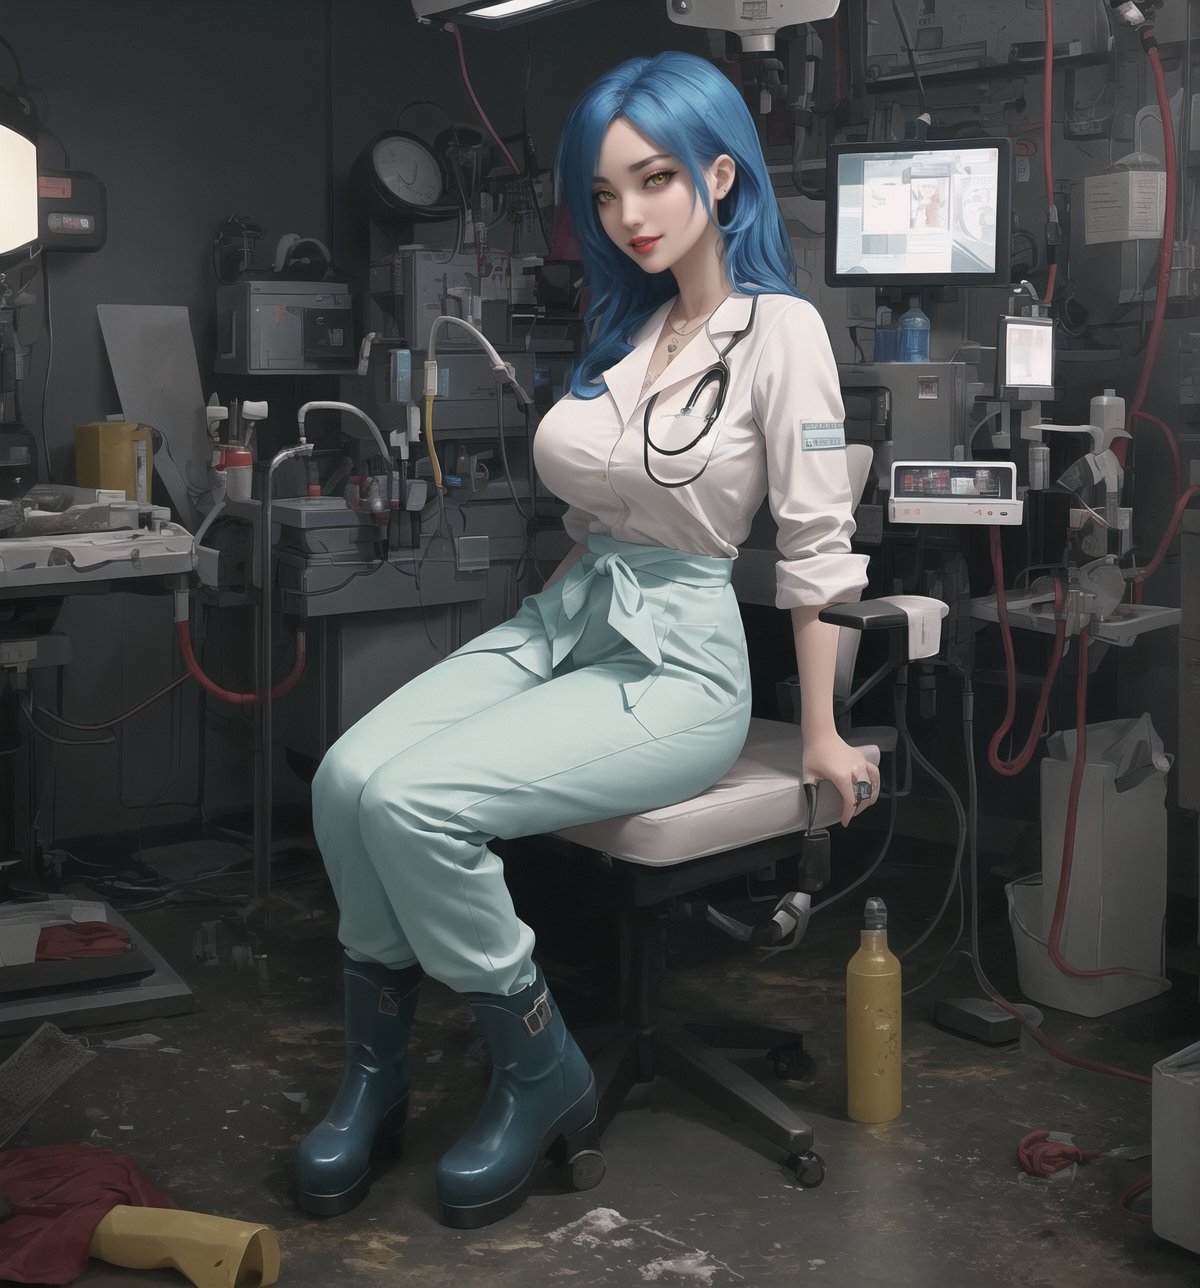 An ultra-detailed 16K masterpiece with horror and macabre styles, rendered in ultra-high resolution with graphic detail. | Aria, a 32-year-old woman, is dressed in a doctor's outfit, consisting of a white shirt, green pants and a surgical gown. She is also wearing a surgical mask, latex gloves and rubber boots. Her blue hair is short and unkempt, with a few locks tucked behind her ears. She has yellow eyes, looking at the viewer while smiling sensually, showing her teeth and wearing red lipstick. It is located in a macabre operating room, with filthy hospital structures, metal structures, destroyed machines and a macabre and filthy environment. The scene is lit by fluorescent lights, creating eerie shadows on the walls. There are surgical instruments scattered around the place, creating an environment of tension and fear. | The image highlights Aria's sensual figure and the macabre elements of the operating room, as well as the detailed textures on the structures, instruments and machines. | Dark and sinister lighting effects create a frightening and tense atmosphere, while Aria's sensual pose adds a seductive touch to the image. | A horror and seductive scene of a female doctor in a macabre operating room, exploring themes of fear, tension and sensuality. | (((The image reveals a full-body shot as Aria assumes a sensual pose, engagingly leaning against a structure within the scene in an exciting manner. She takes on a sensual pose as she interacts, boldly leaning on a structure, leaning back and boldly throwing herself onto the structure, reclining back in an exhilarating way.))). | ((((full-body shot)))), ((perfect pose)), ((perfect limbs, perfect fingers, better hands, perfect hands)), ((perfect legs, perfect feet)), ((huge breasts)), ((perfect design)), ((perfect composition)), ((very detailed scene, very detailed background, perfect layout, correct imperfections)), Enhance, Ultra details++, More Detail